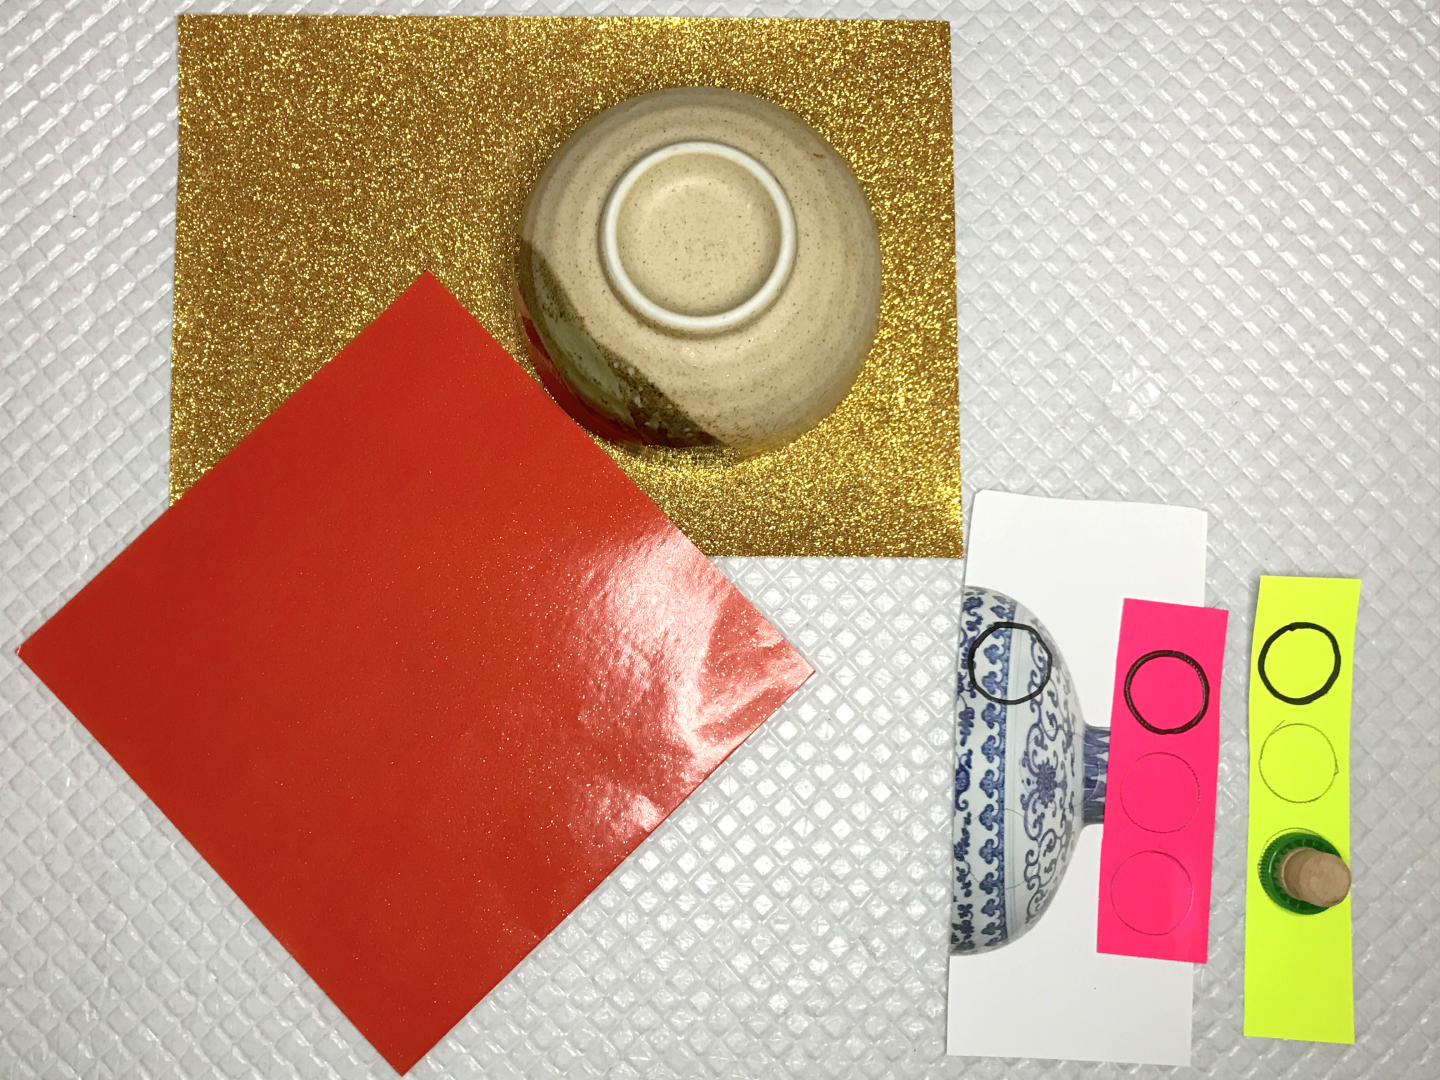 A square piece of red paper. A bowl on top of gold paper to be drawn around. Small pieces of paper with small circles drawn on.